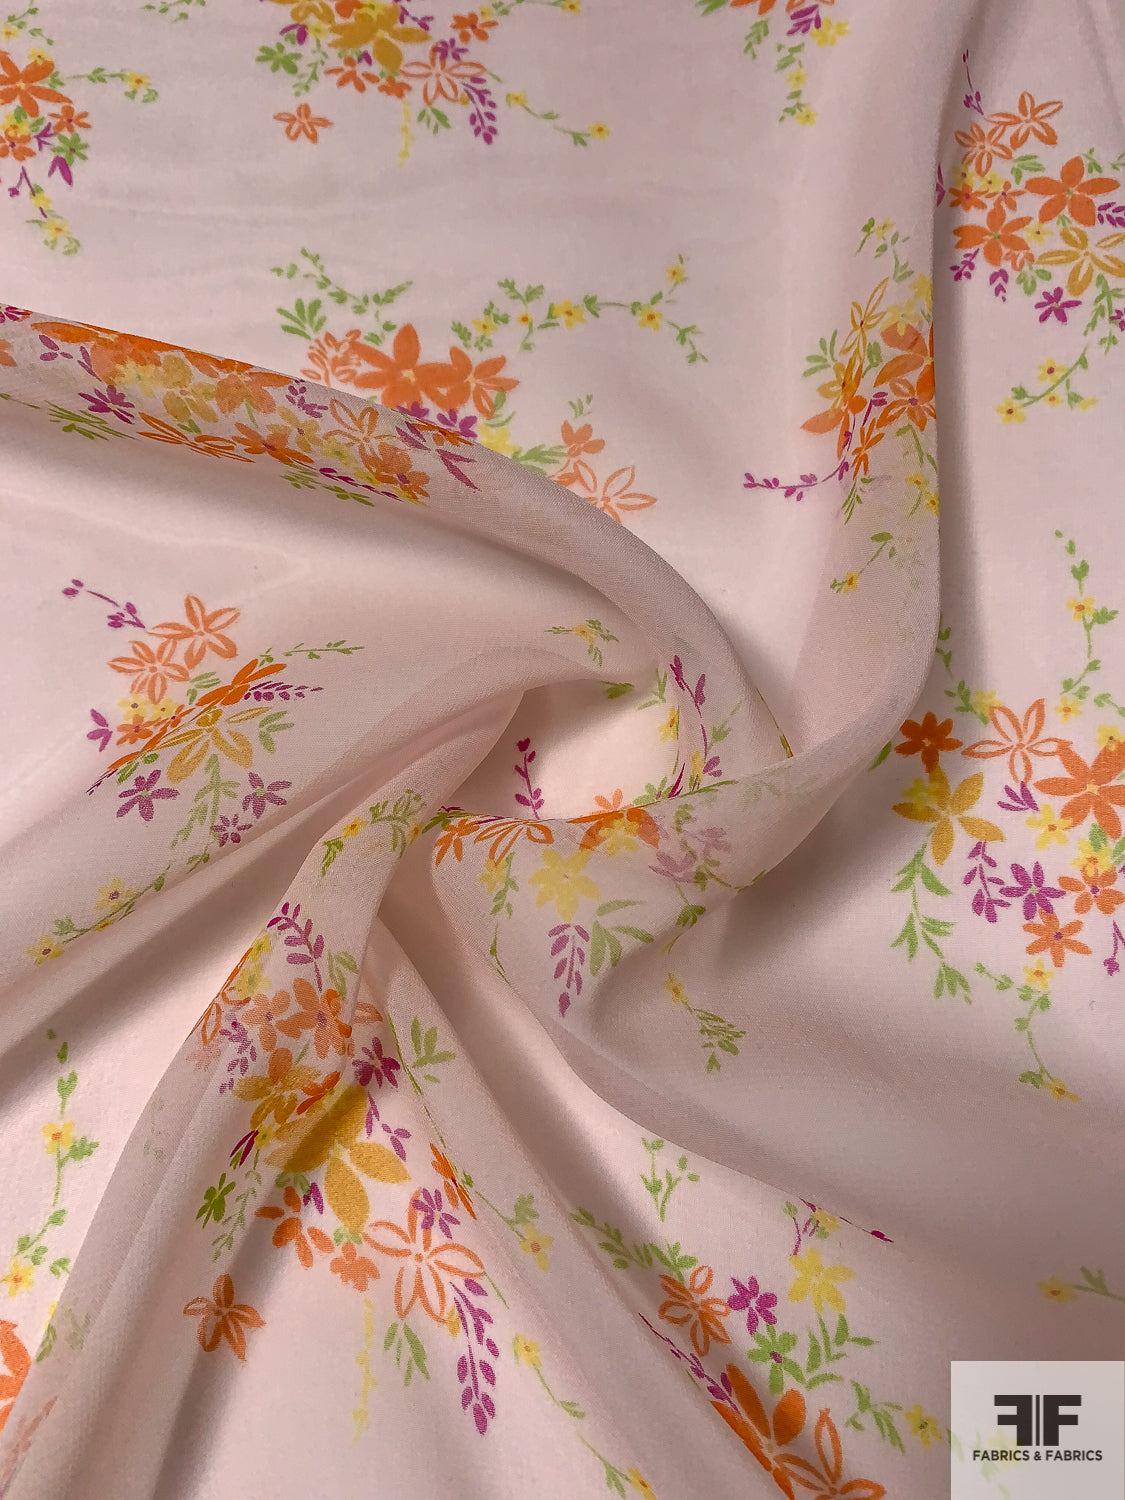 Dainty Floral Bouquets Printed Silk Chiffon - Light Pink / Orange / Lime / Orchid